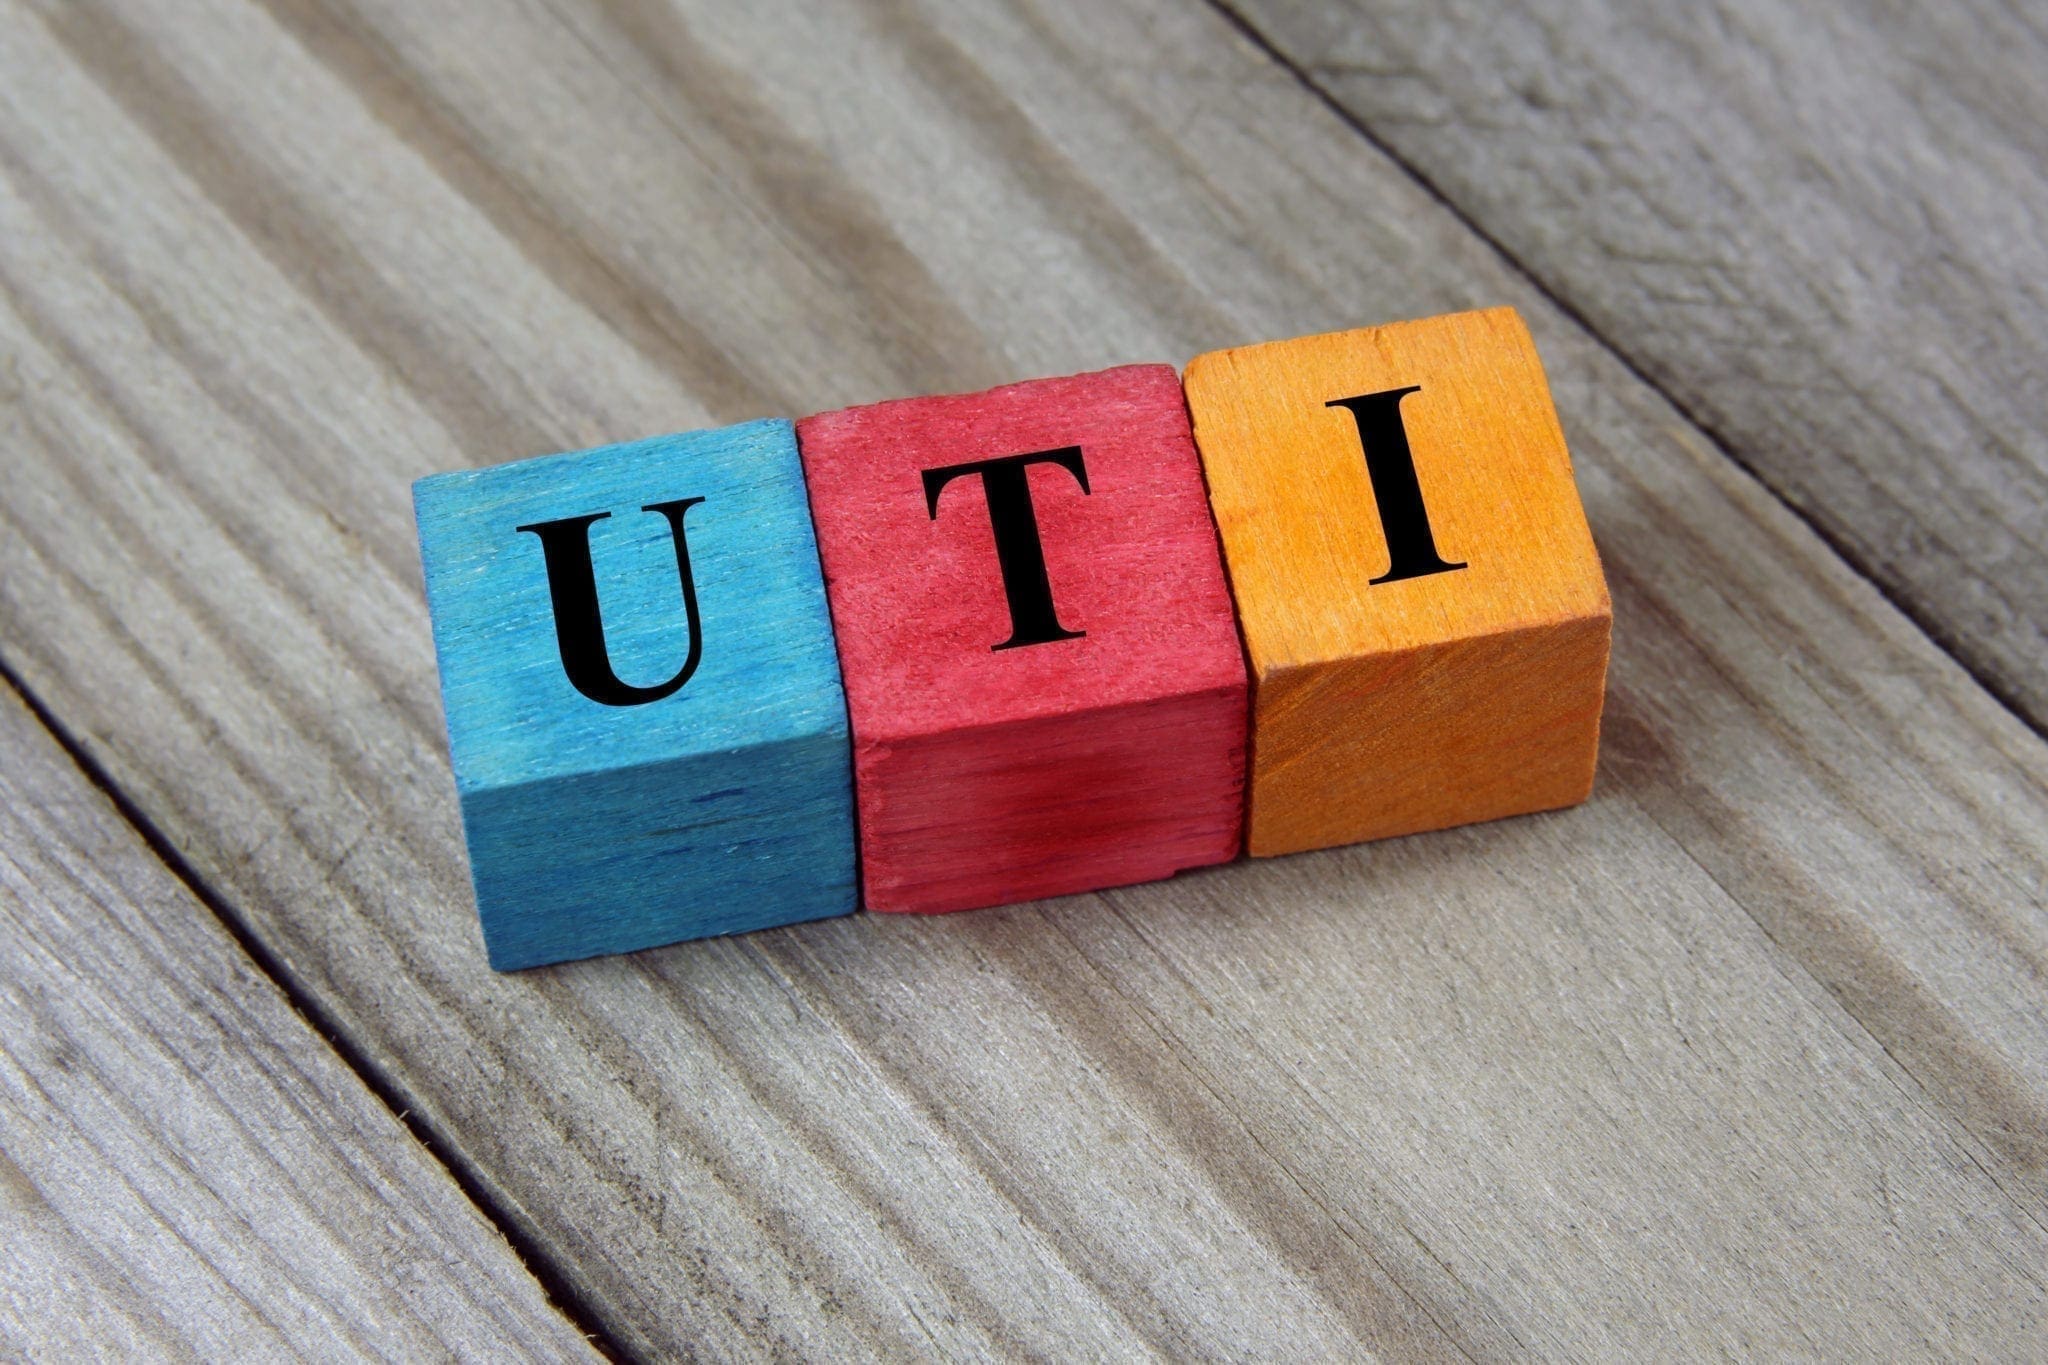 Urinary Tract Infection (UTI) - Symptoms & Treatment | familydoctor.org